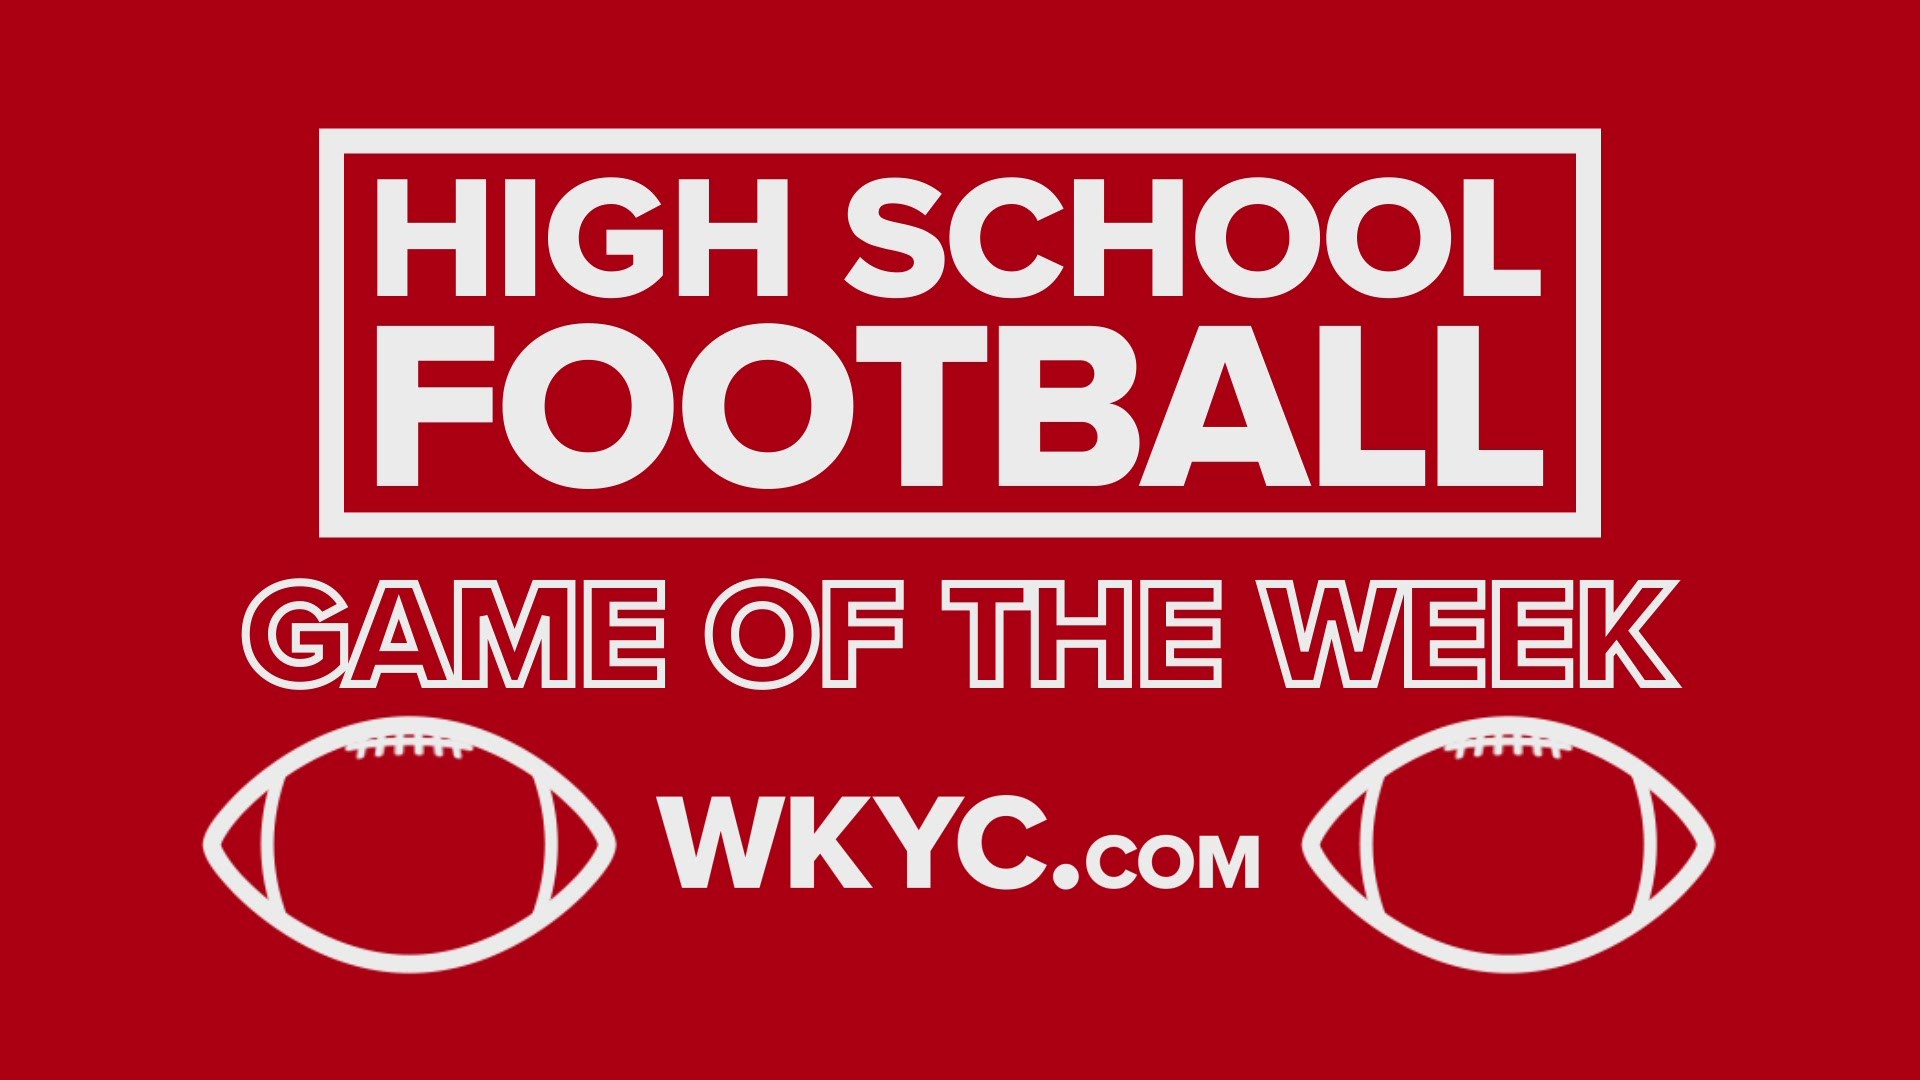 Avon Lake trounces North Olmsted 49-14 in WKYC.com's Game of the Week